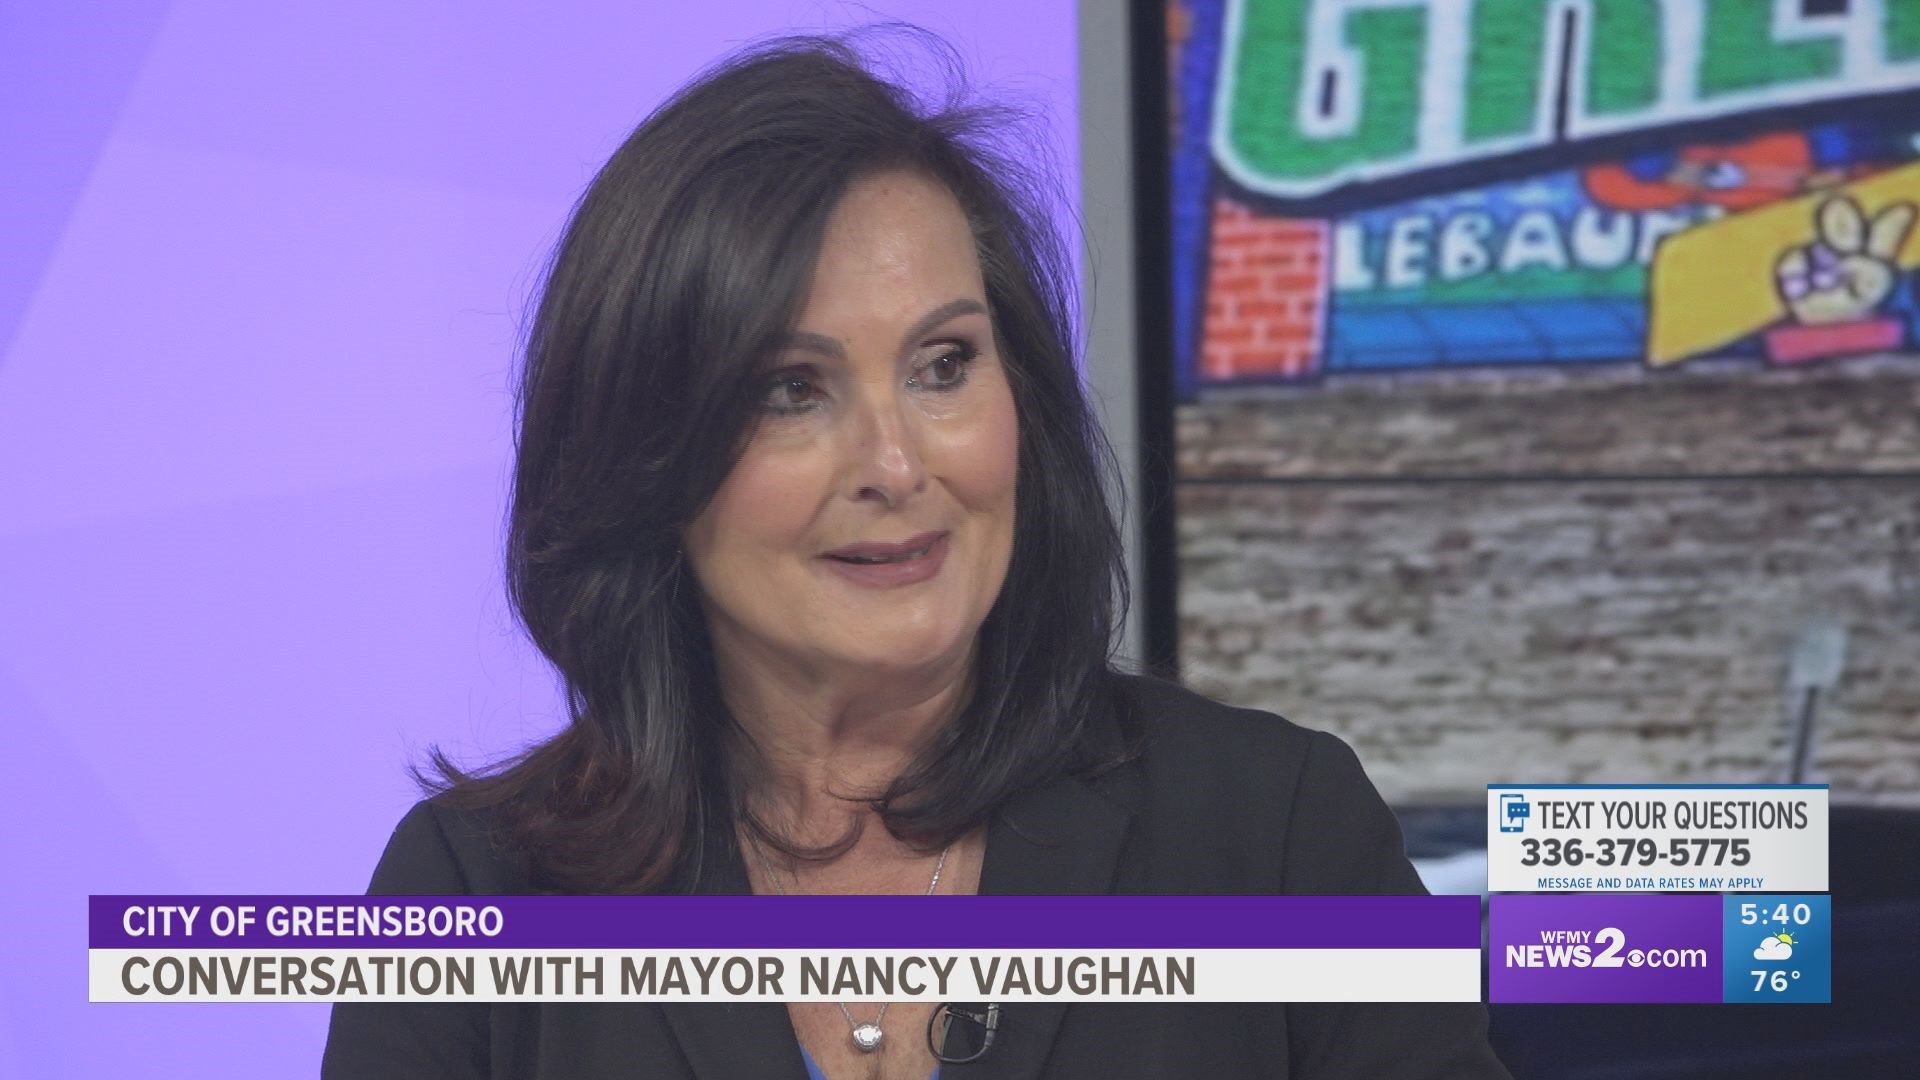 Mayor Nancy Vaughan stopped by WFMY News 2 to answer questions from the community.